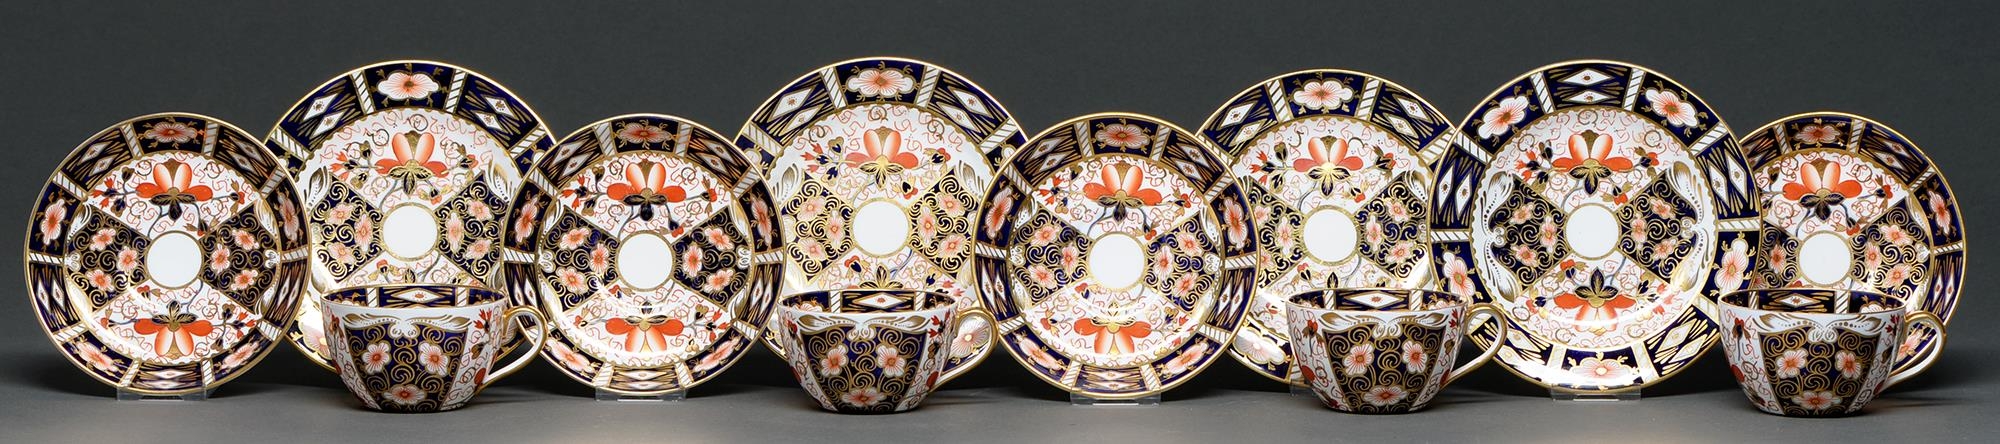 A set of four Royal Crown Derby Old Derby Witches pattern teacups, saucers and side plates, 1924 and